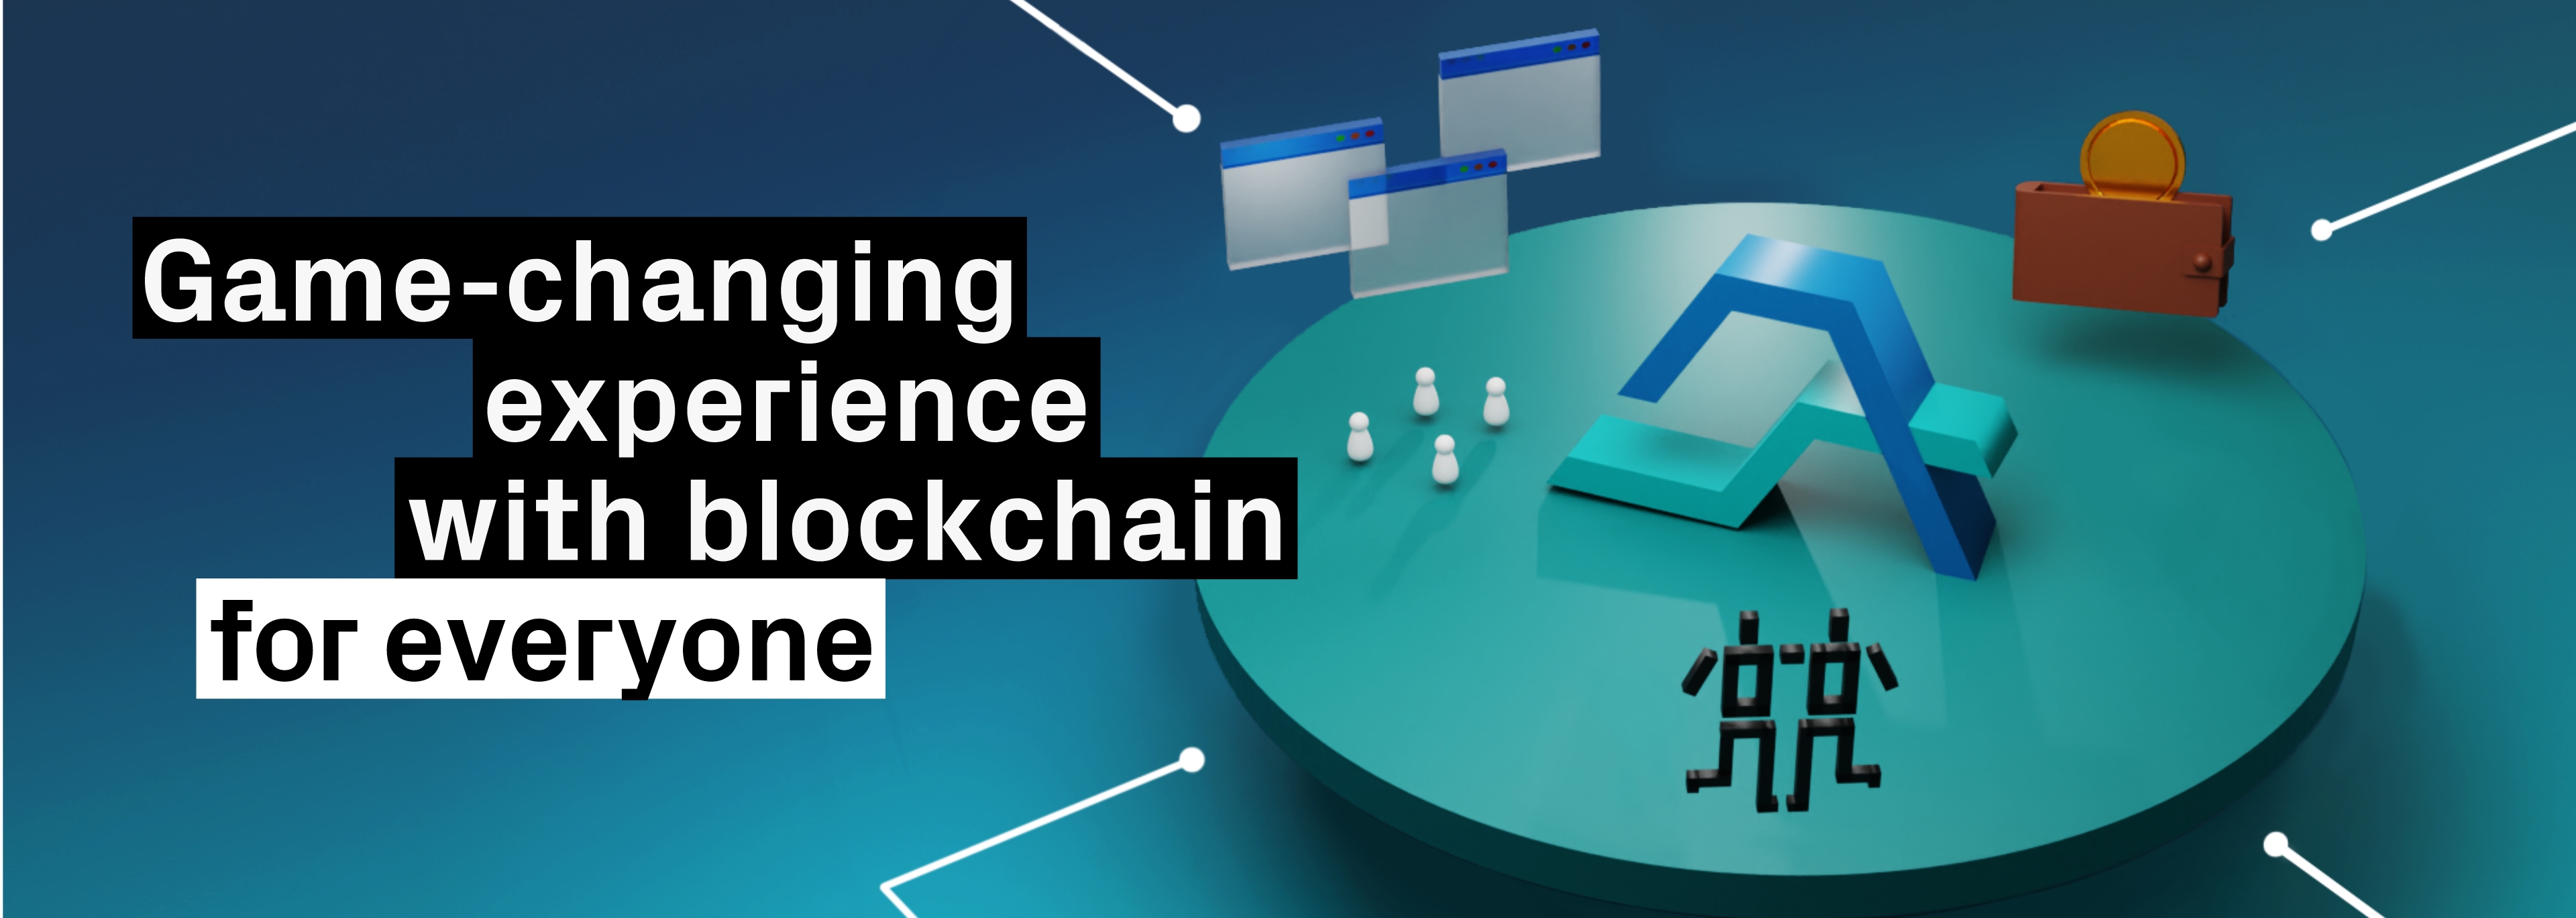 Game-changing experience with blockchain for everyone